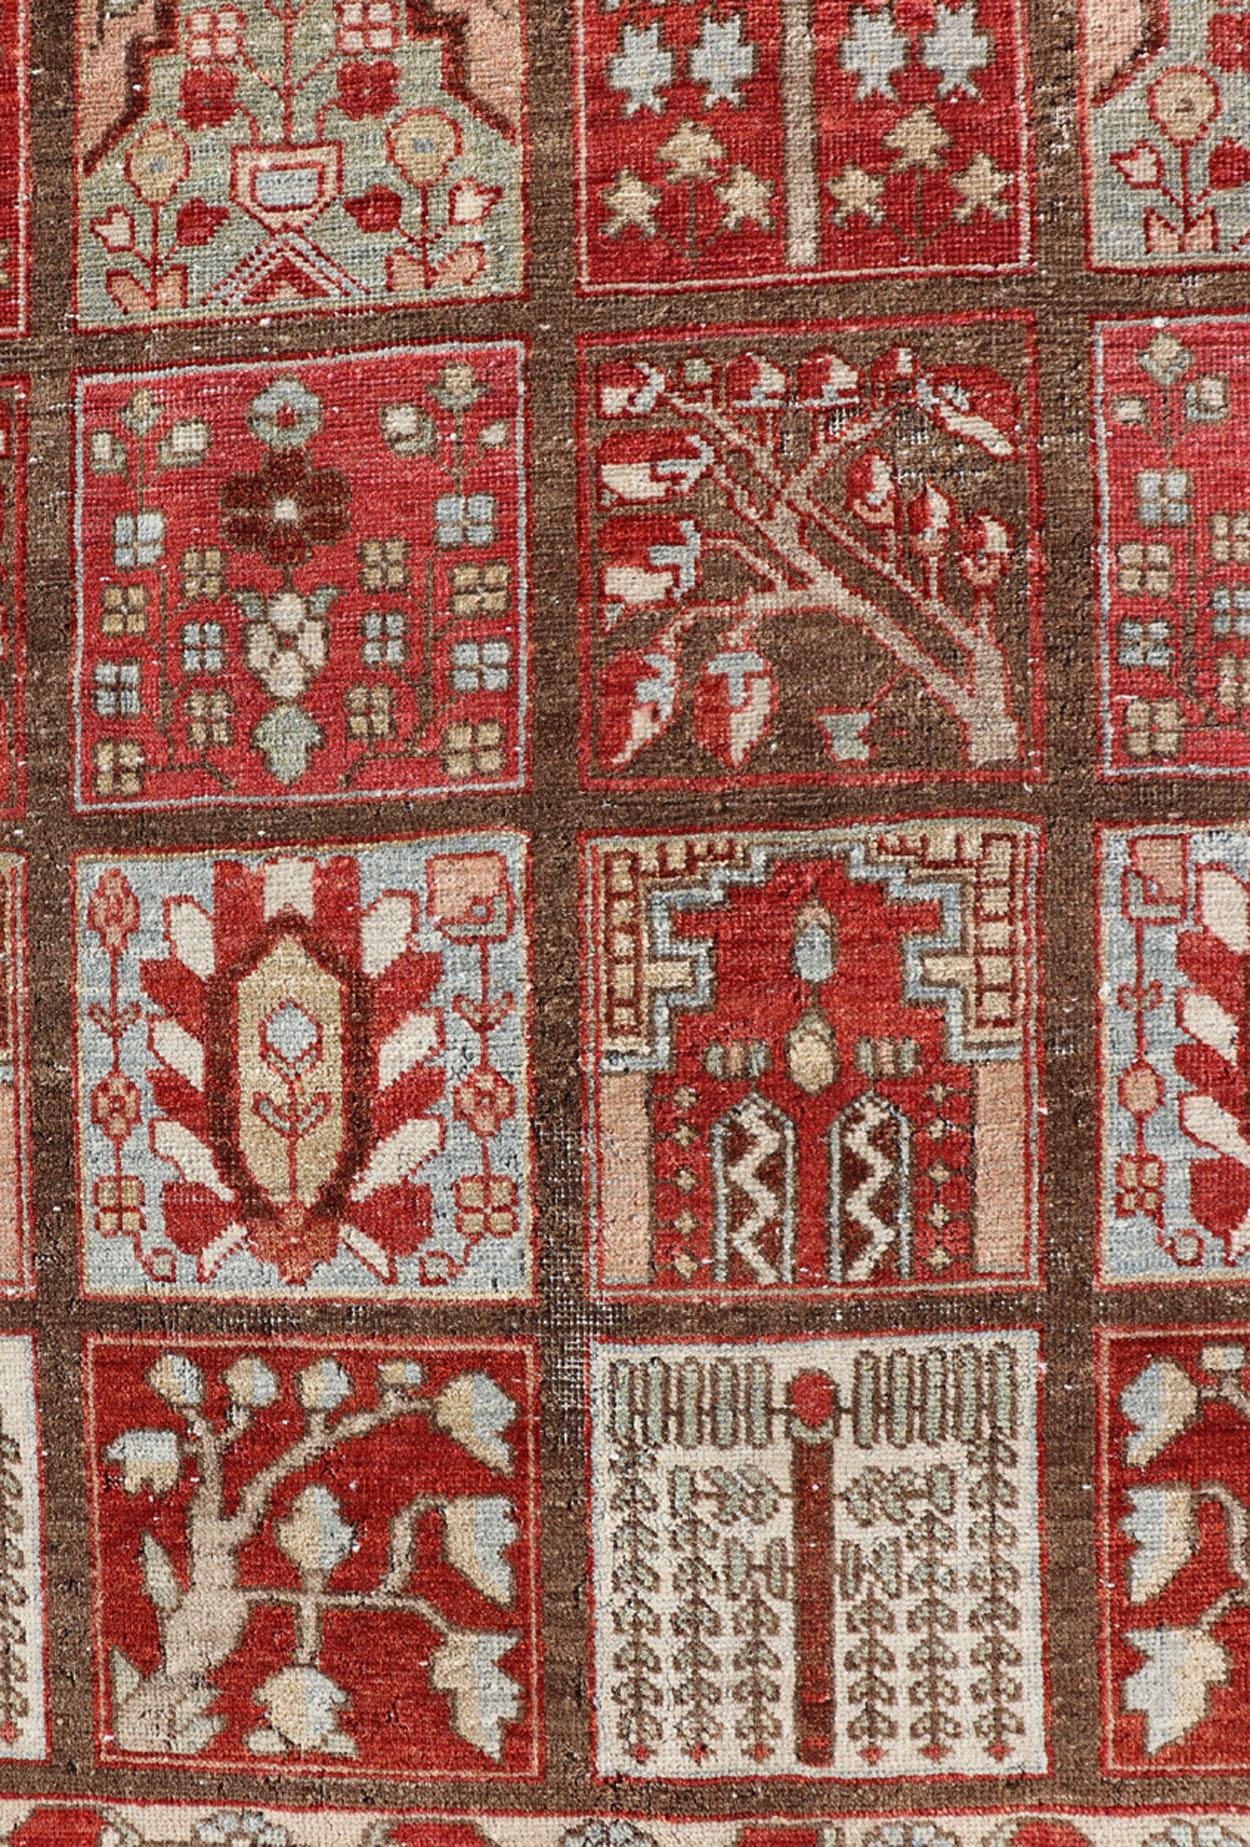 Hand-Knotted Garden Design Antique Bakhtiari Rug in Red, Tan, light green & Multi Colors For Sale